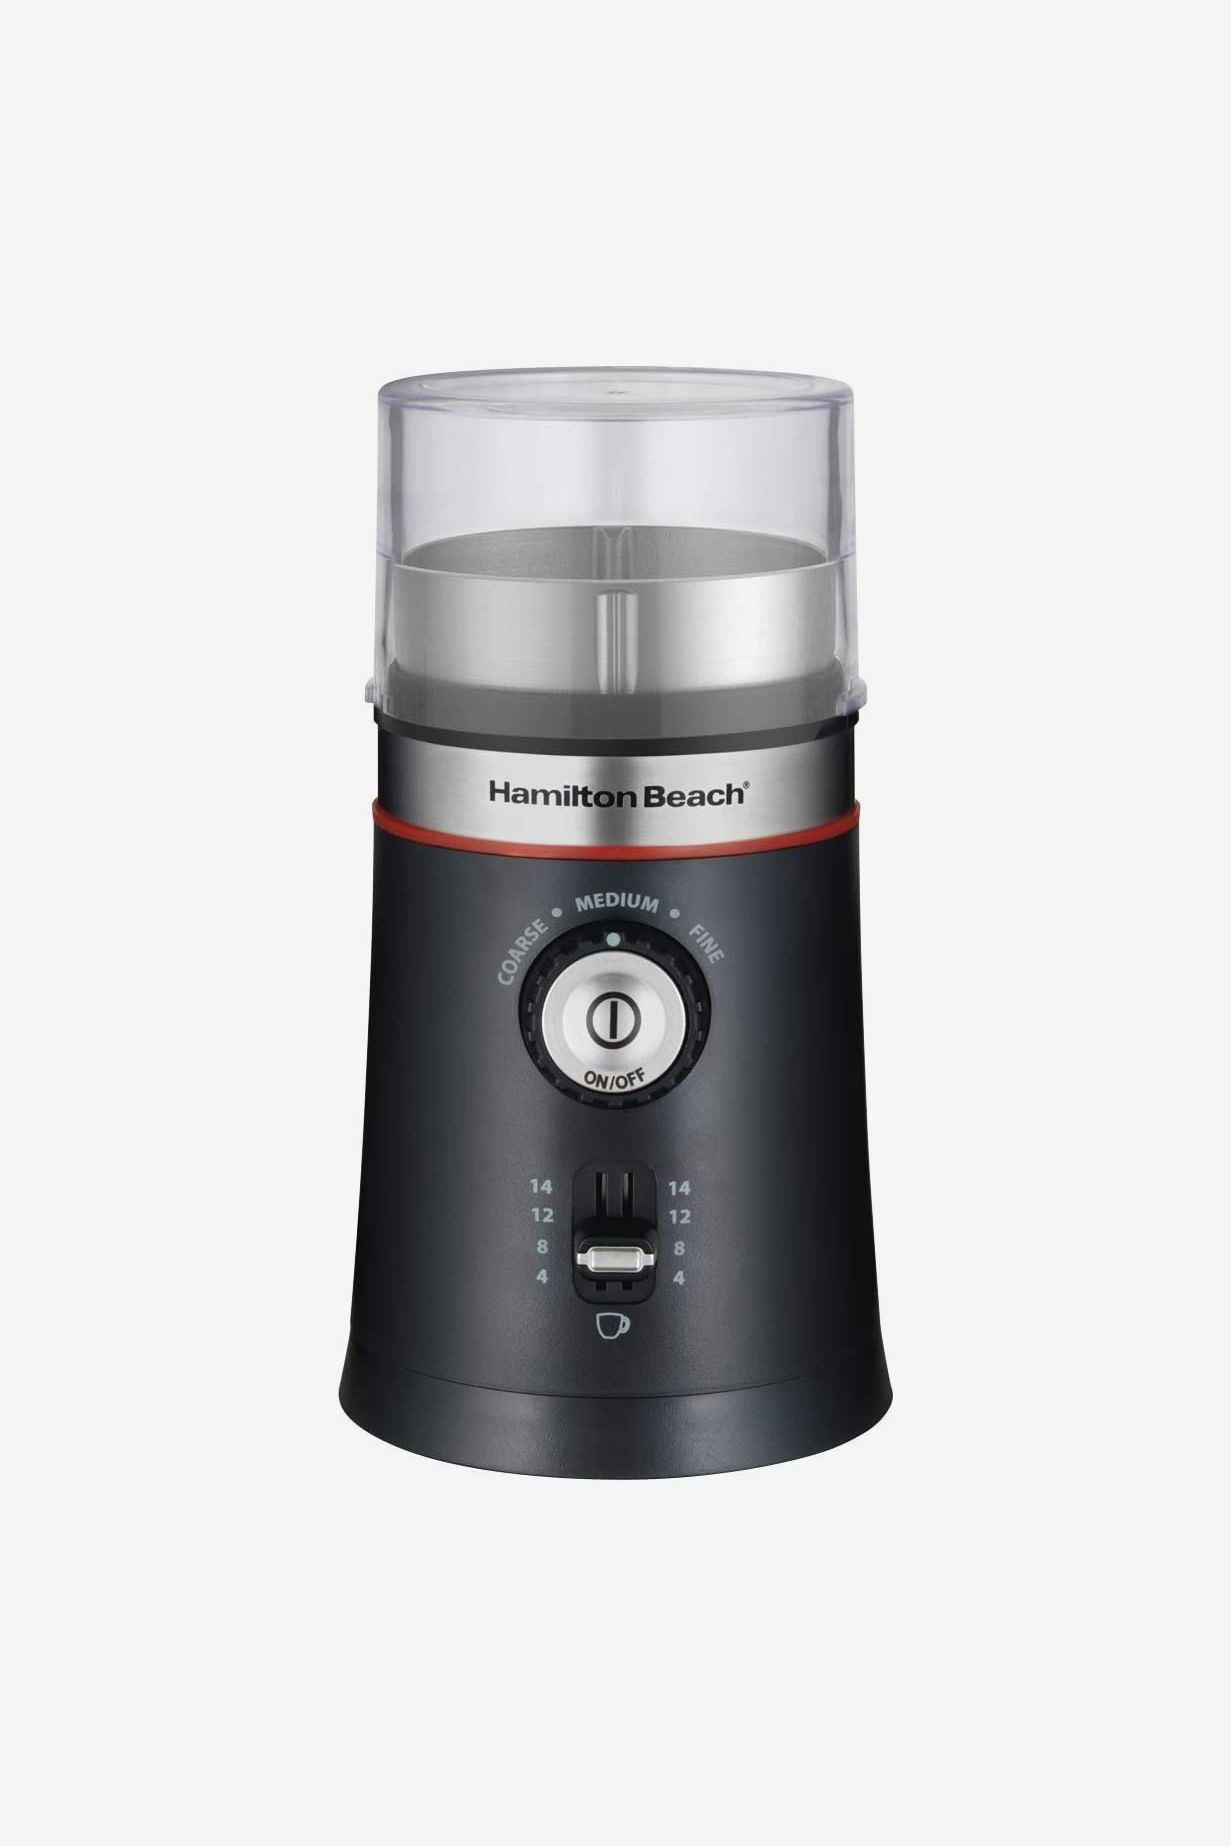 Spice Grinders: Why You Need One and Our Top 12 Picks 